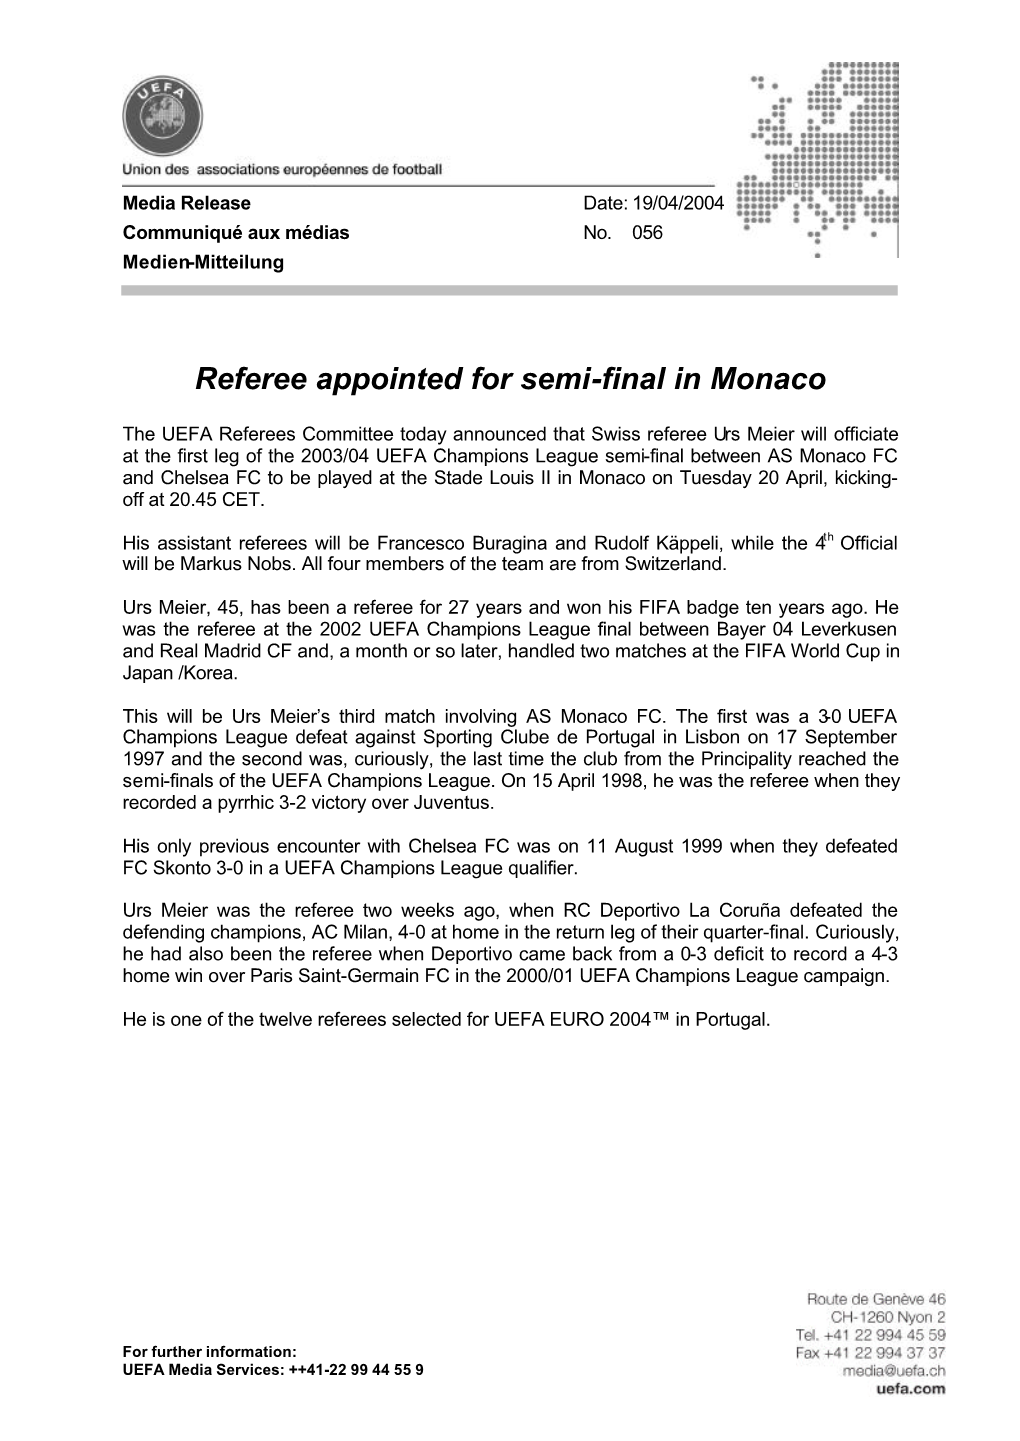 Referee Appointed for Semi-Final in Monaco